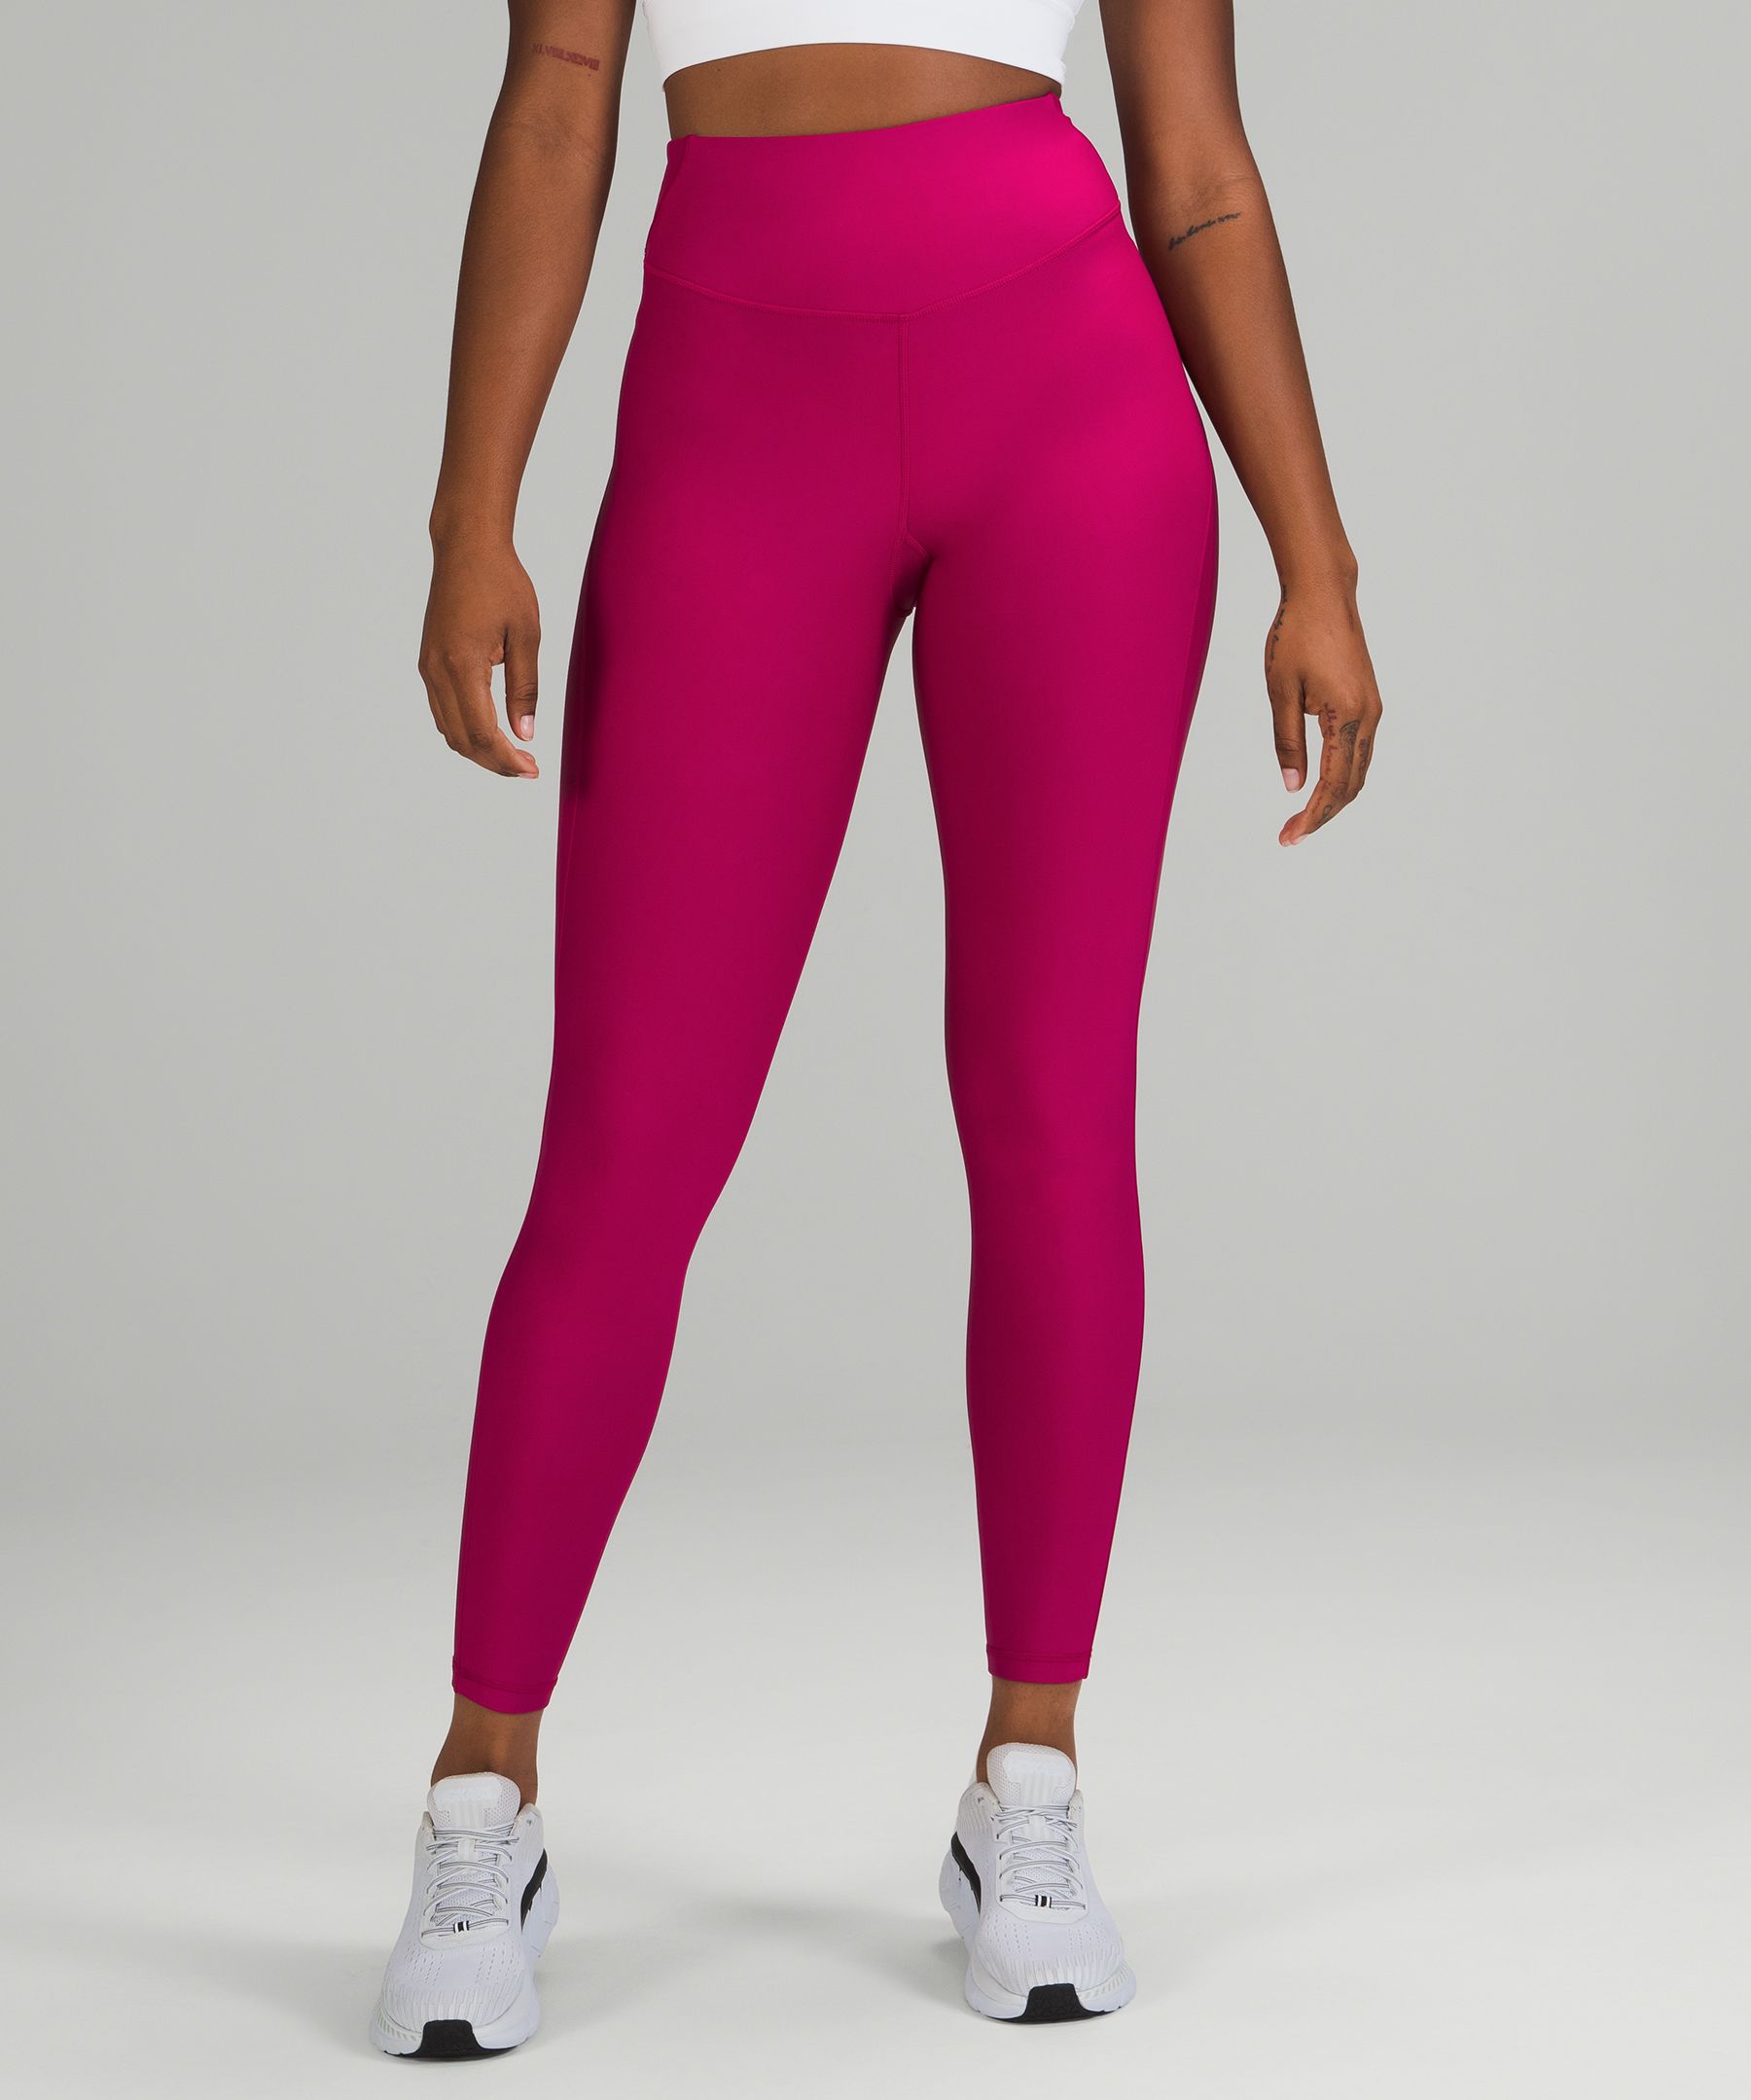 Fit Review: Base Pace High-Rise Tight 25 - Living My Bex Life